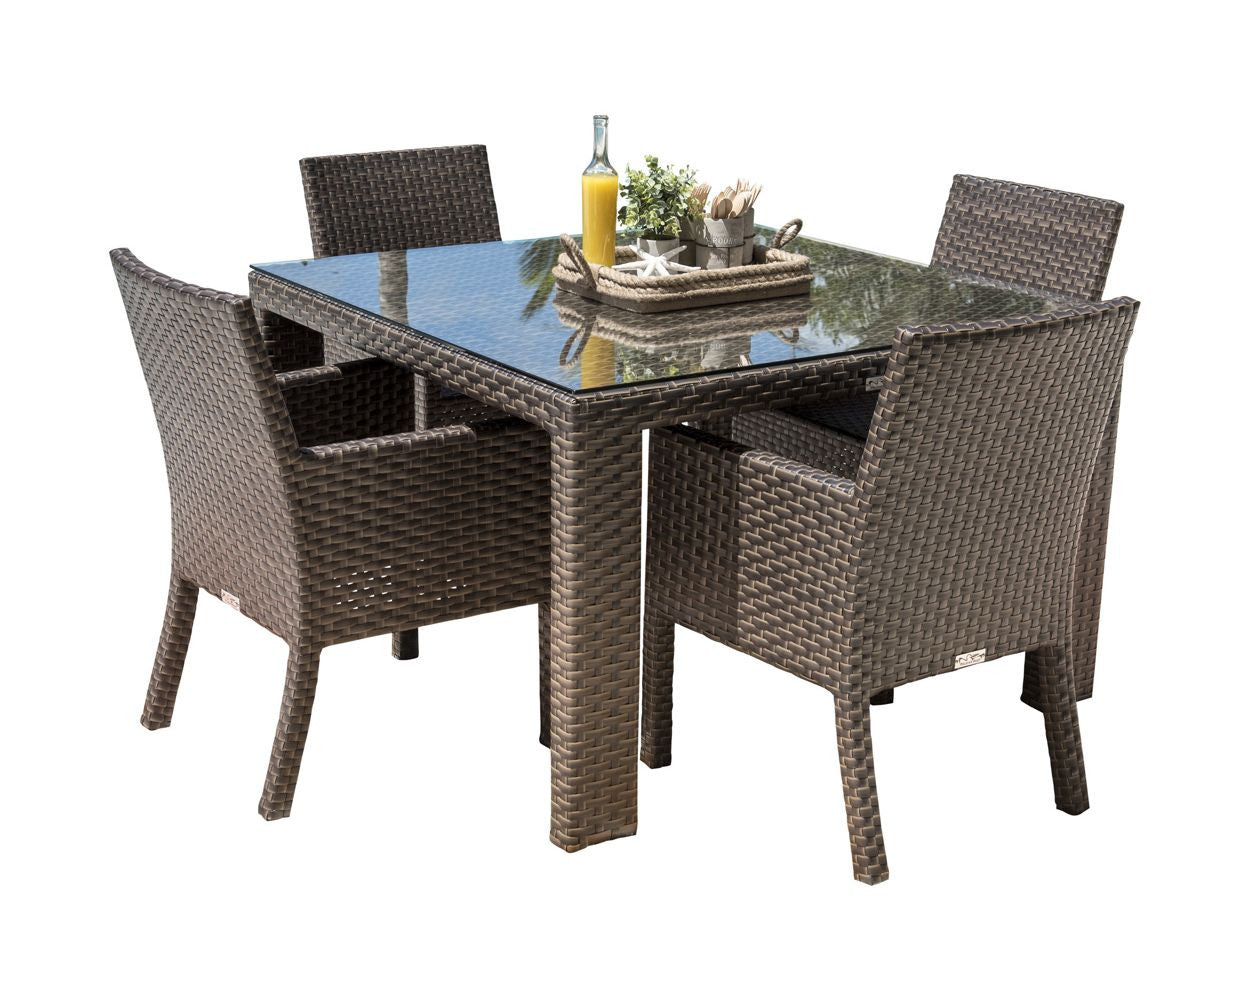 Hospitality Rattan Fiji 5 PC Arm Chair Dining Set with Cushions